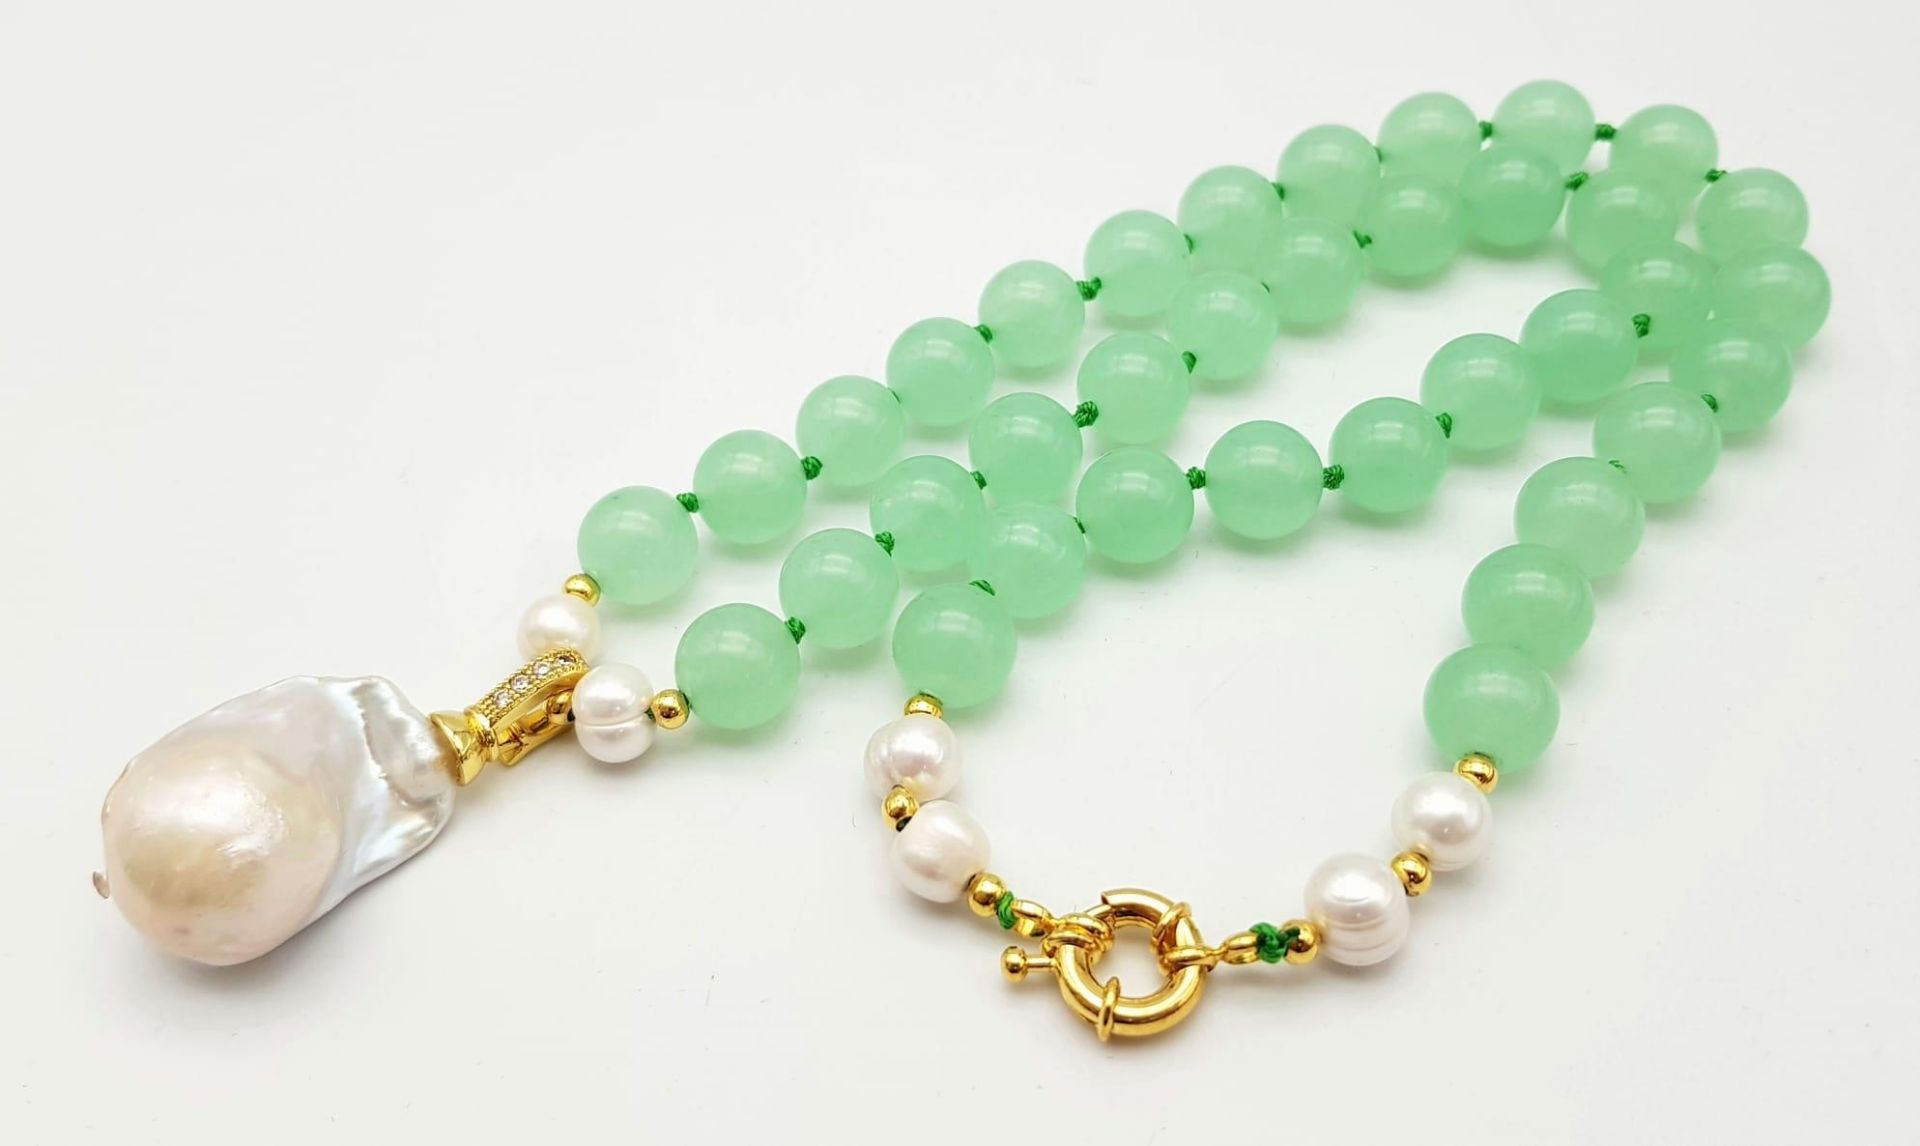 A Pale Green Jade Bead Necklace with Keisha Pearl Drop Pendant. 10mm jade beads with cultured - Image 2 of 4